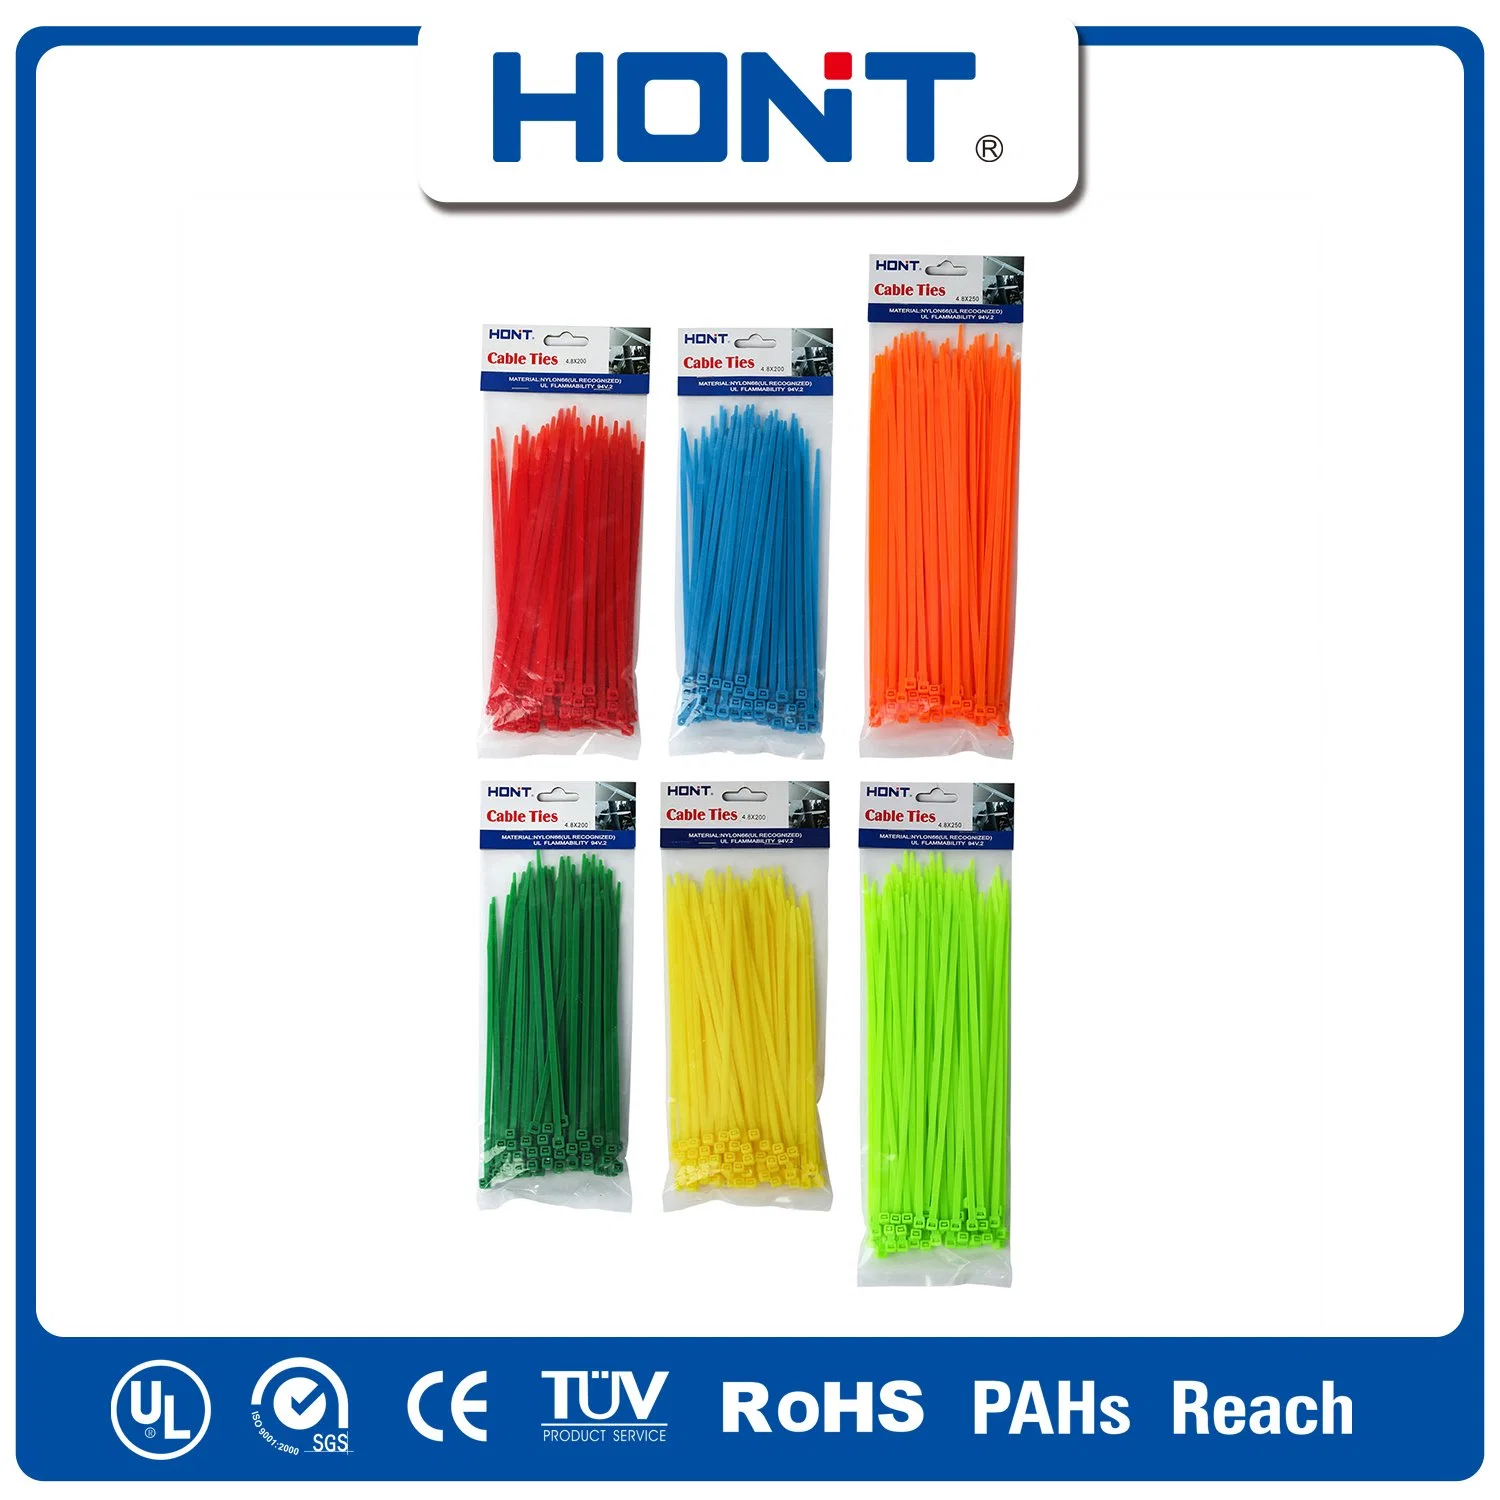 ISO Approved Self-Locking Hont Plastic Bag + Sticker Exporting Carton/Tray Zip Tie Cable Accessories